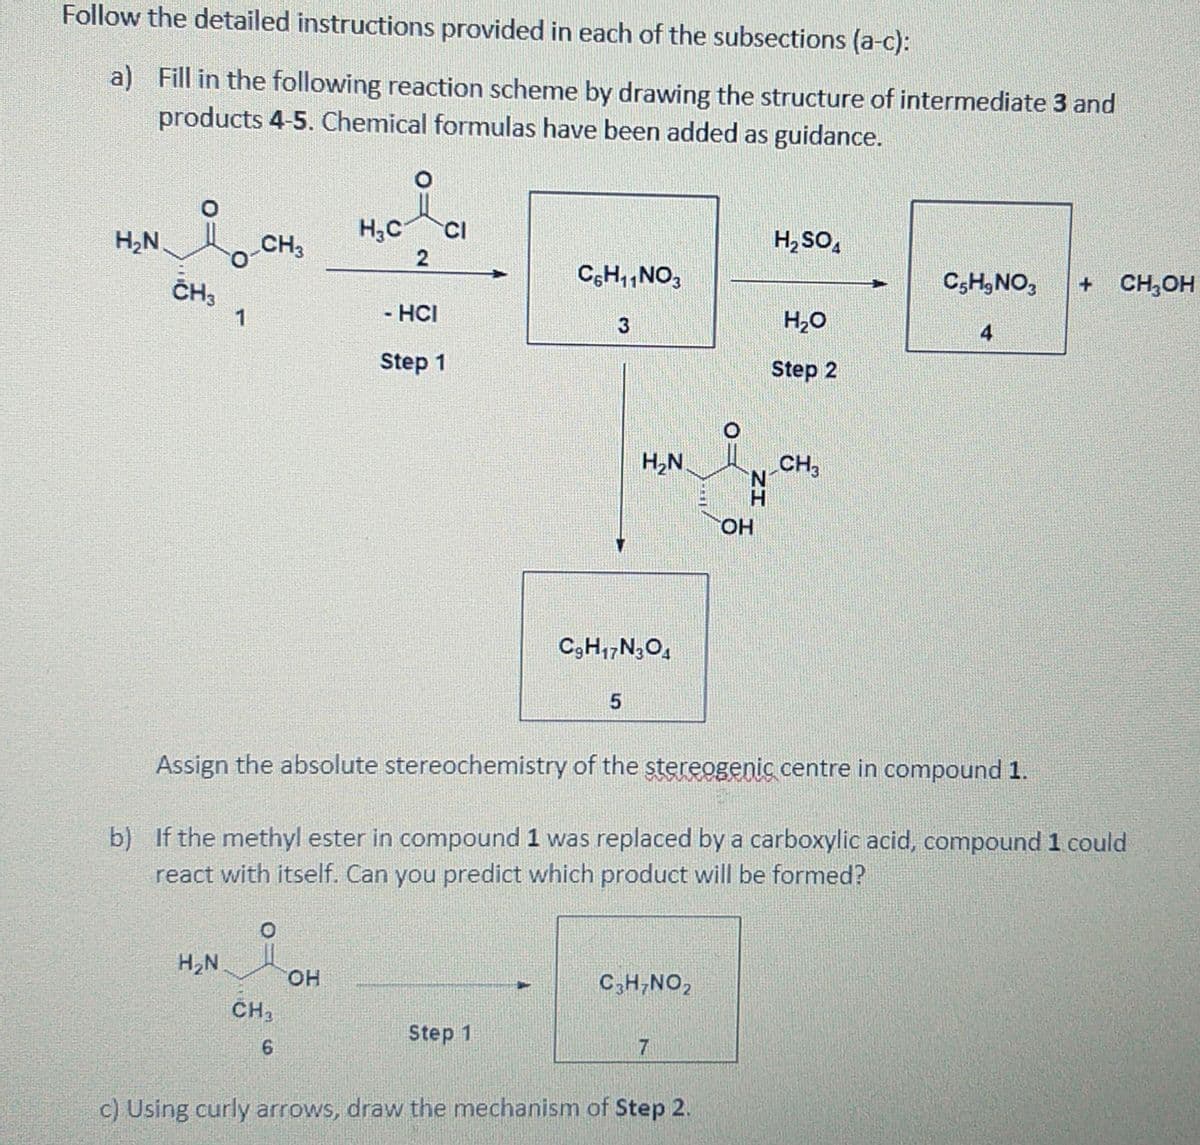 Follow the detailed instructions provided in each of the subsections (a-c):
a) Fill in the following reaction scheme by drawing the structure of intermediate 3 and
products 4-5. Chemical formulas have been added as guidance.
H,C
CI
H,N
CH3
H, SO,
2
CH3
C,H,,NO,
C,H,NO,
CH,OH
1
- HCI
H20
3
Step 1
Step 2
H2N
CH,
OH
C,H,,N,O,
Assign the absolute stereochemistry of the stereogenic centre in compound 1.
b) If the methyl ester in compound 1 was replaced by a carboxylic acid, compound 1 could
react with itself. Can you predict which product will be formed?
H,N
HO.
CH2
C,H;NO,
Step 1
7
c) Using curly arrows, draw the mechanism of Step 2.
